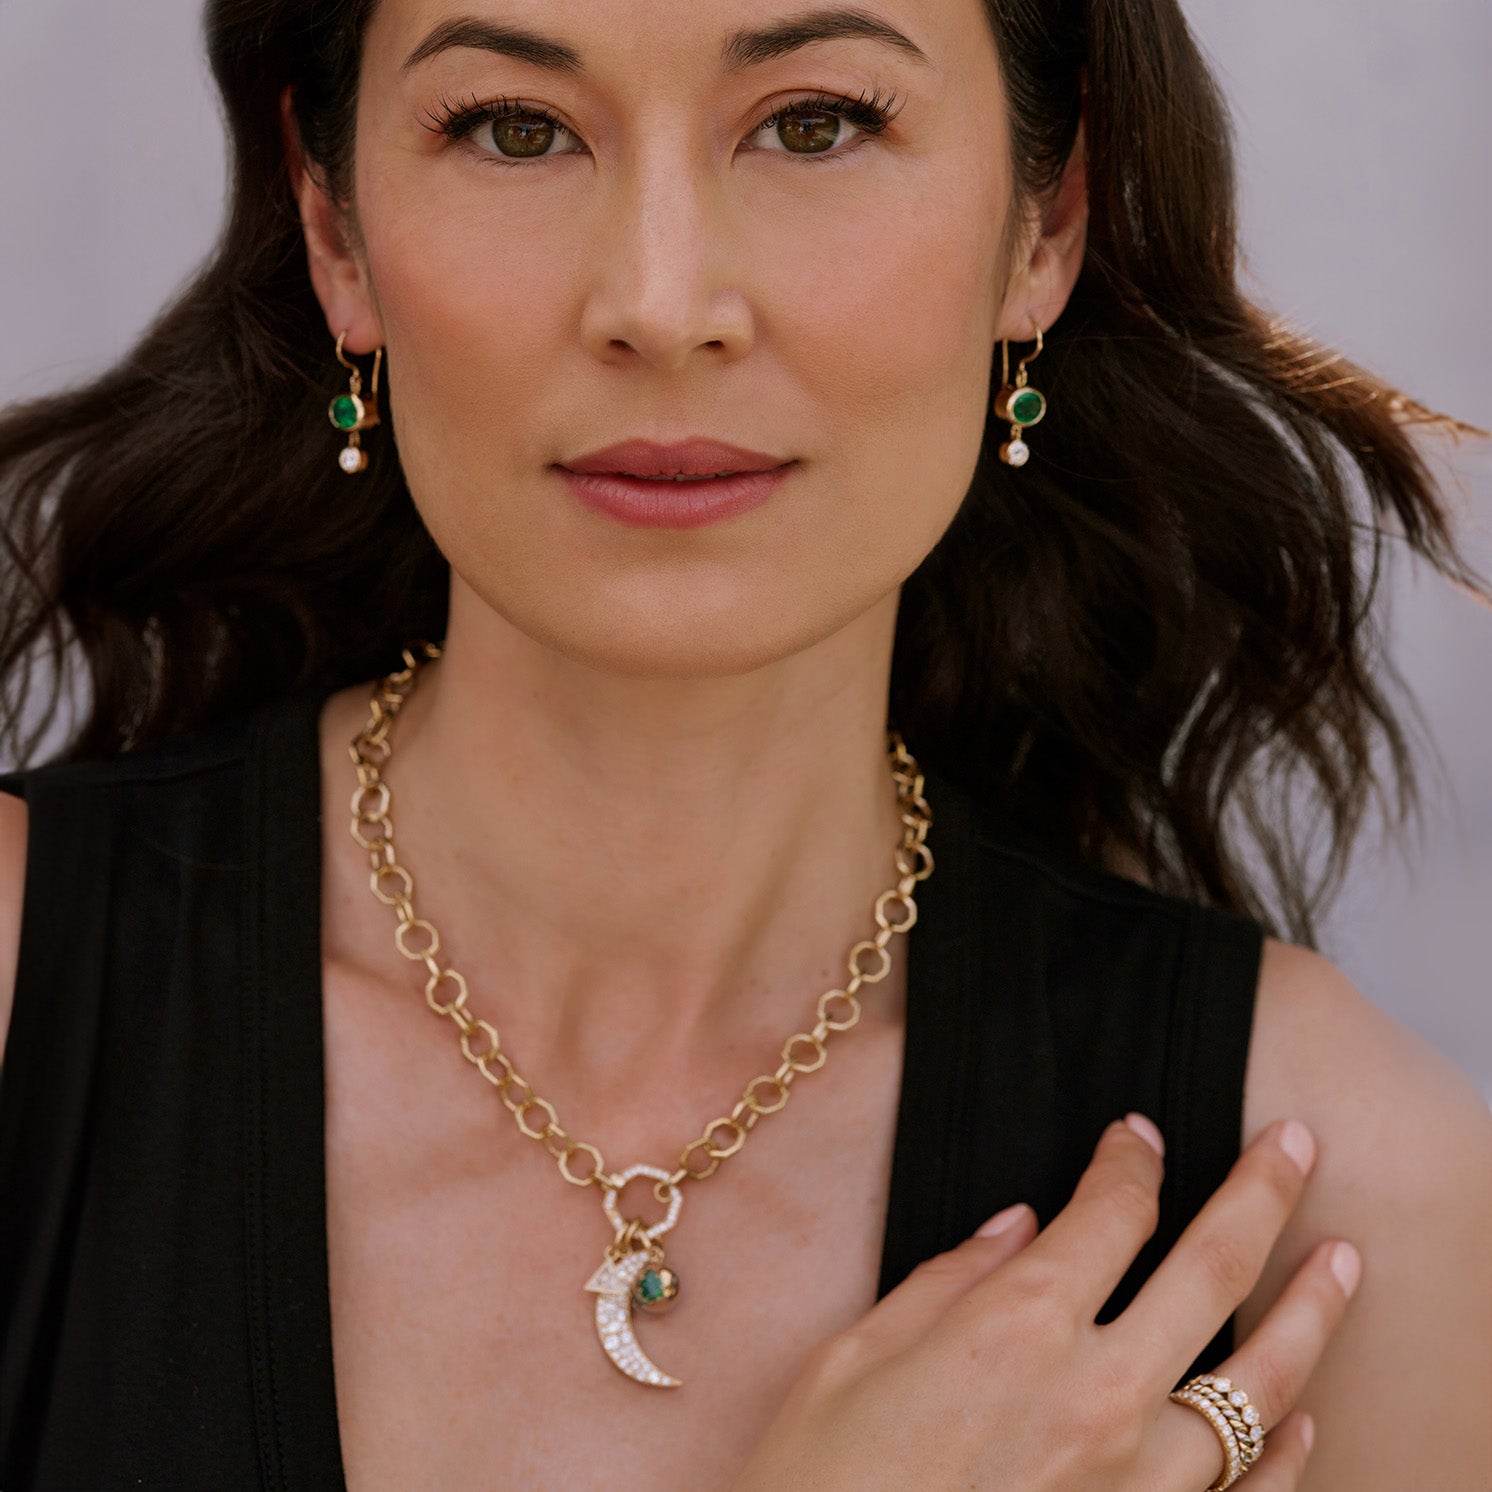 Woman looking at the camera wearing earrings, necklace with charms, and eternity bands from the Single Stone collection